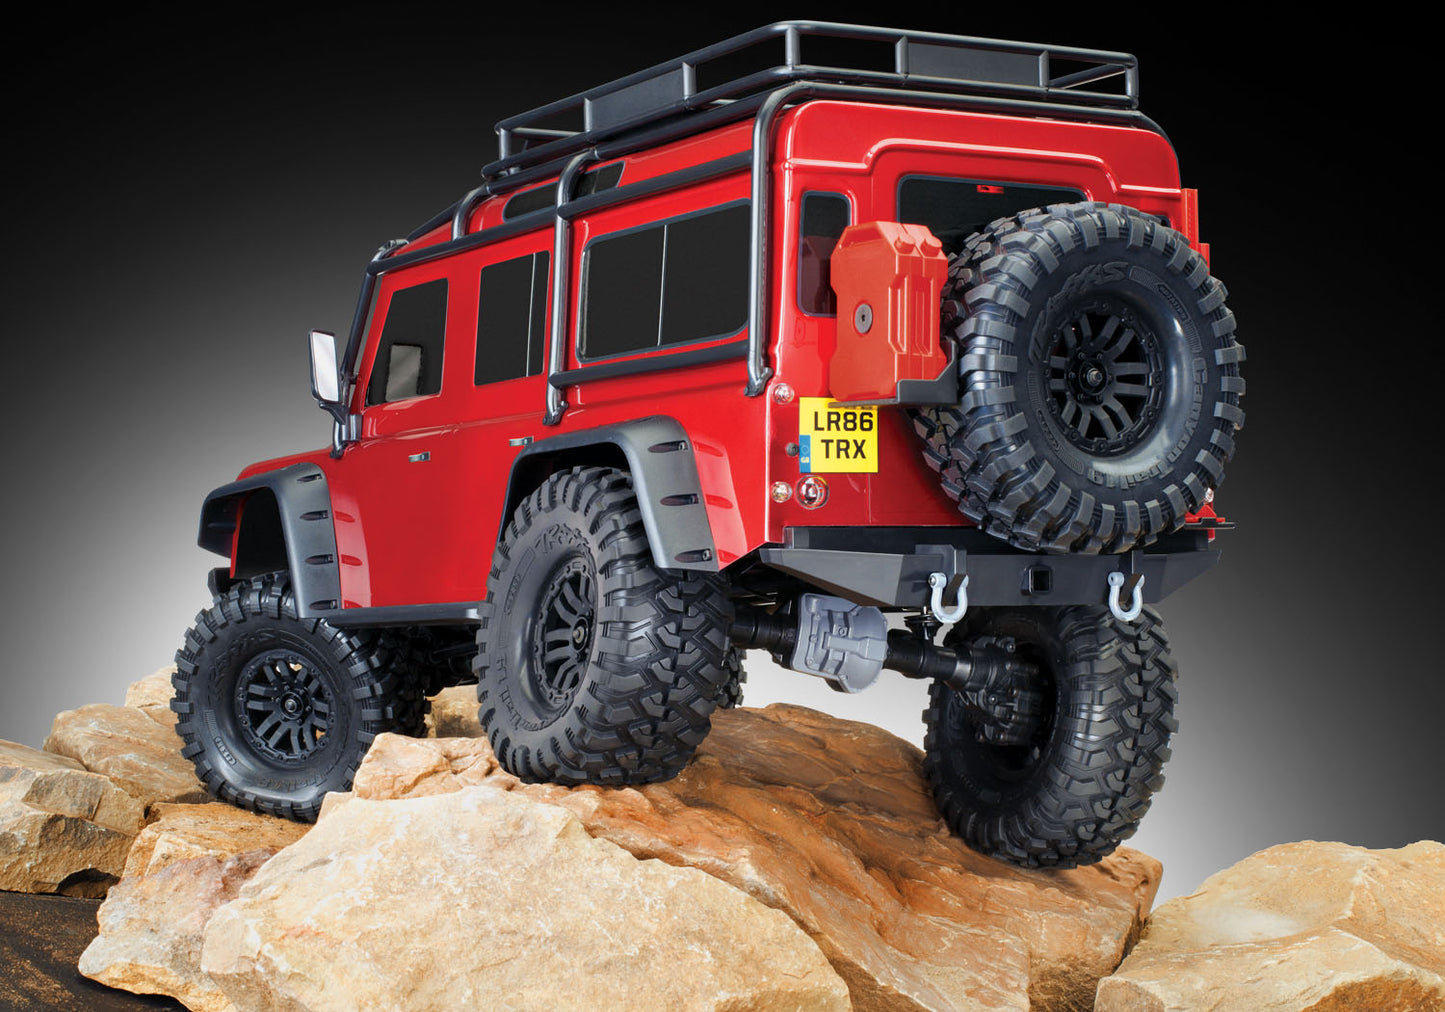 82056-4-RED TRX-4 Scale and Trail Defender Red